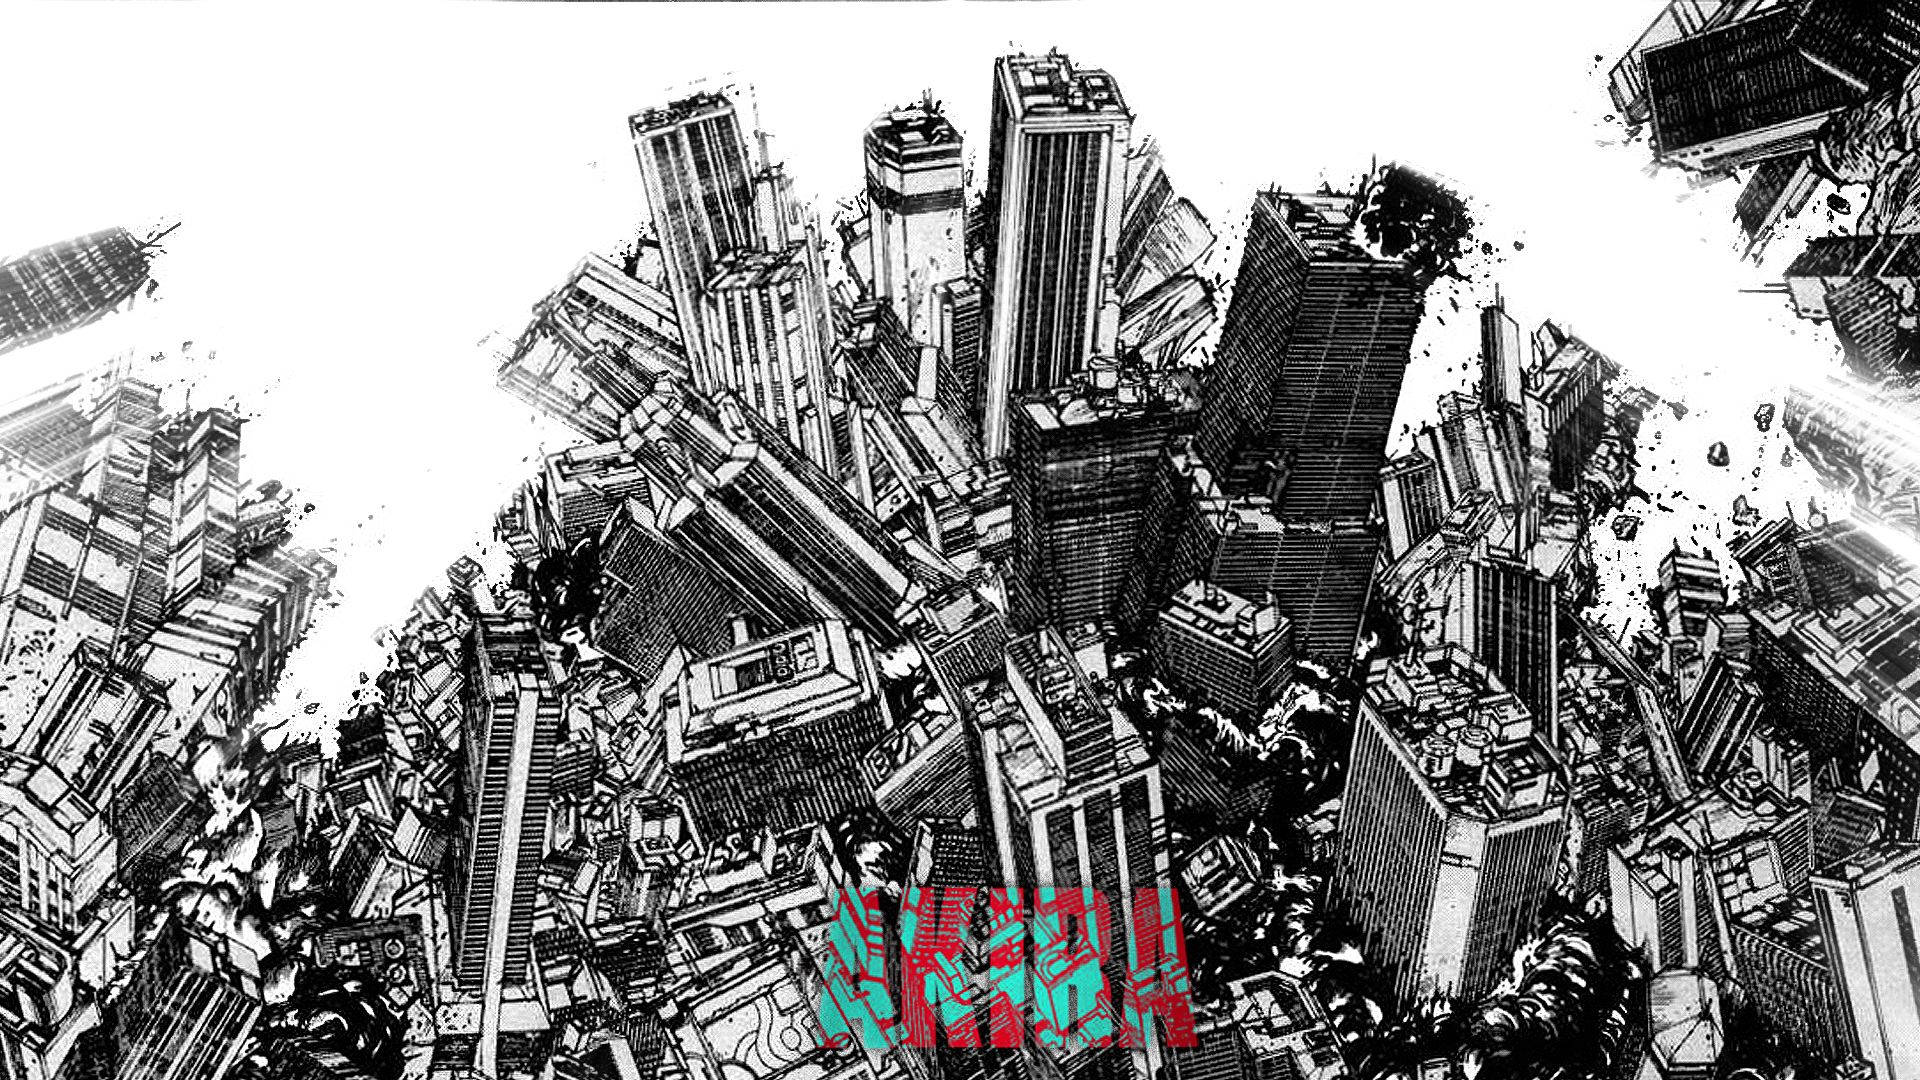 “The doomed city of Tokyo in the classic anime and thriller ‘Akira’” Wallpaper